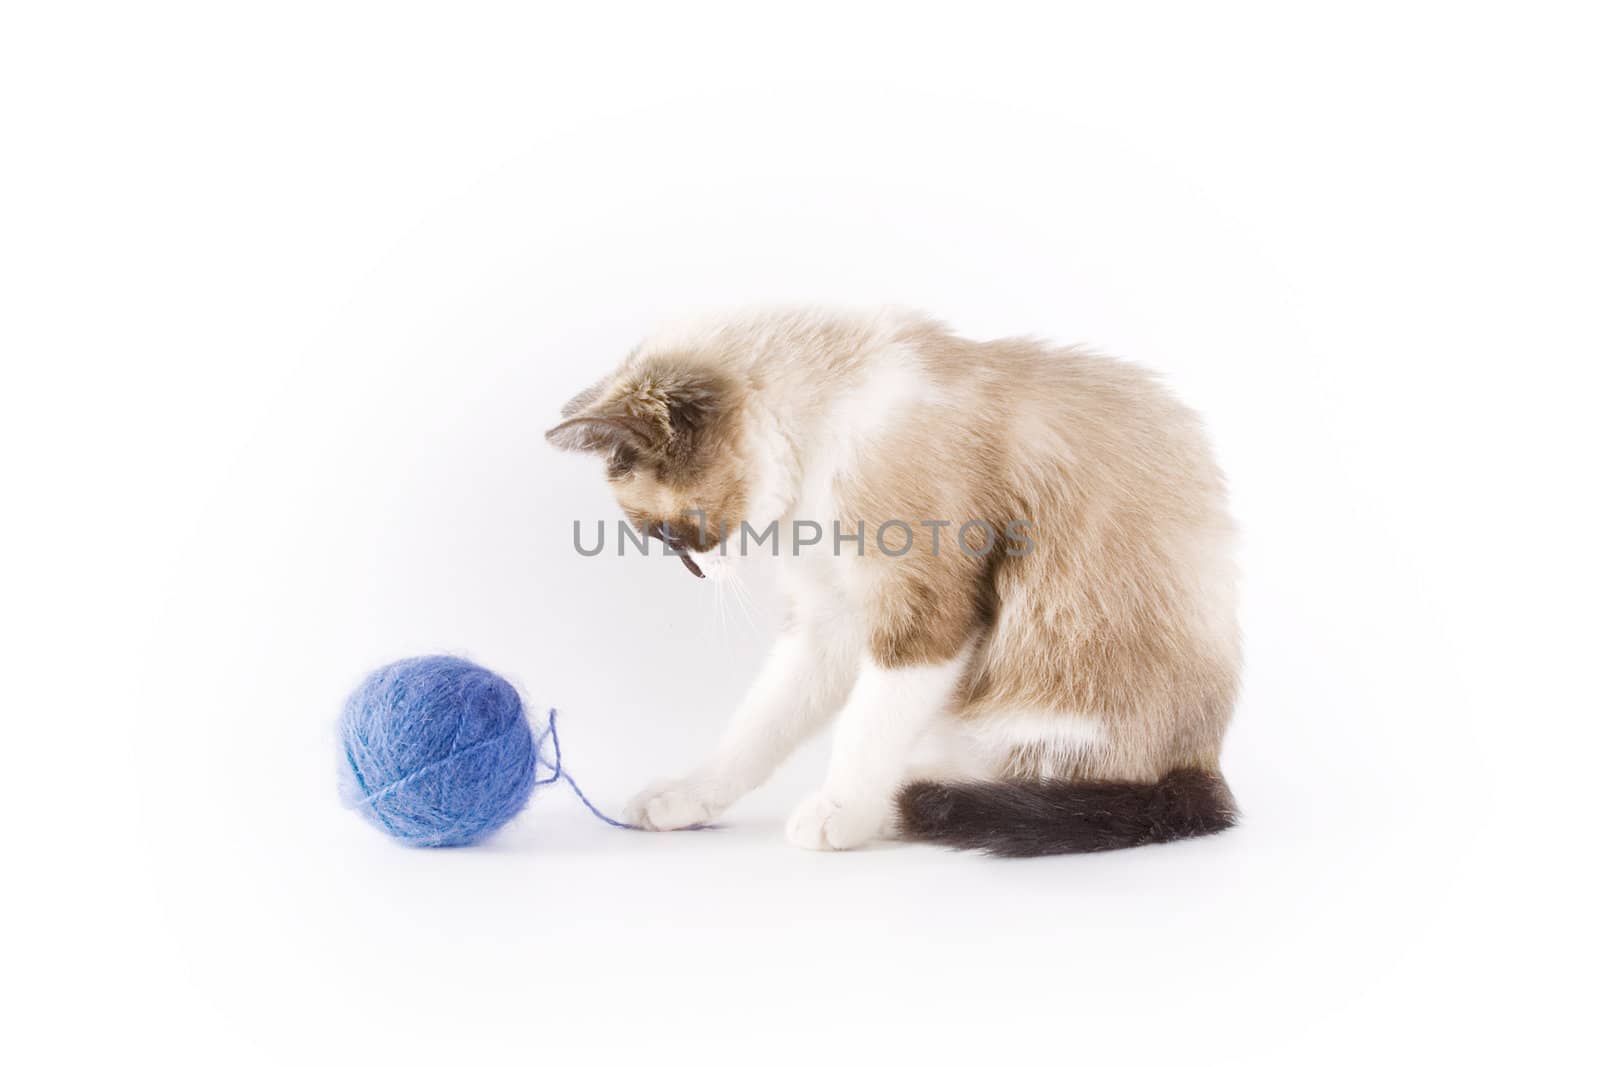 Cute cat and a blue wool ball 